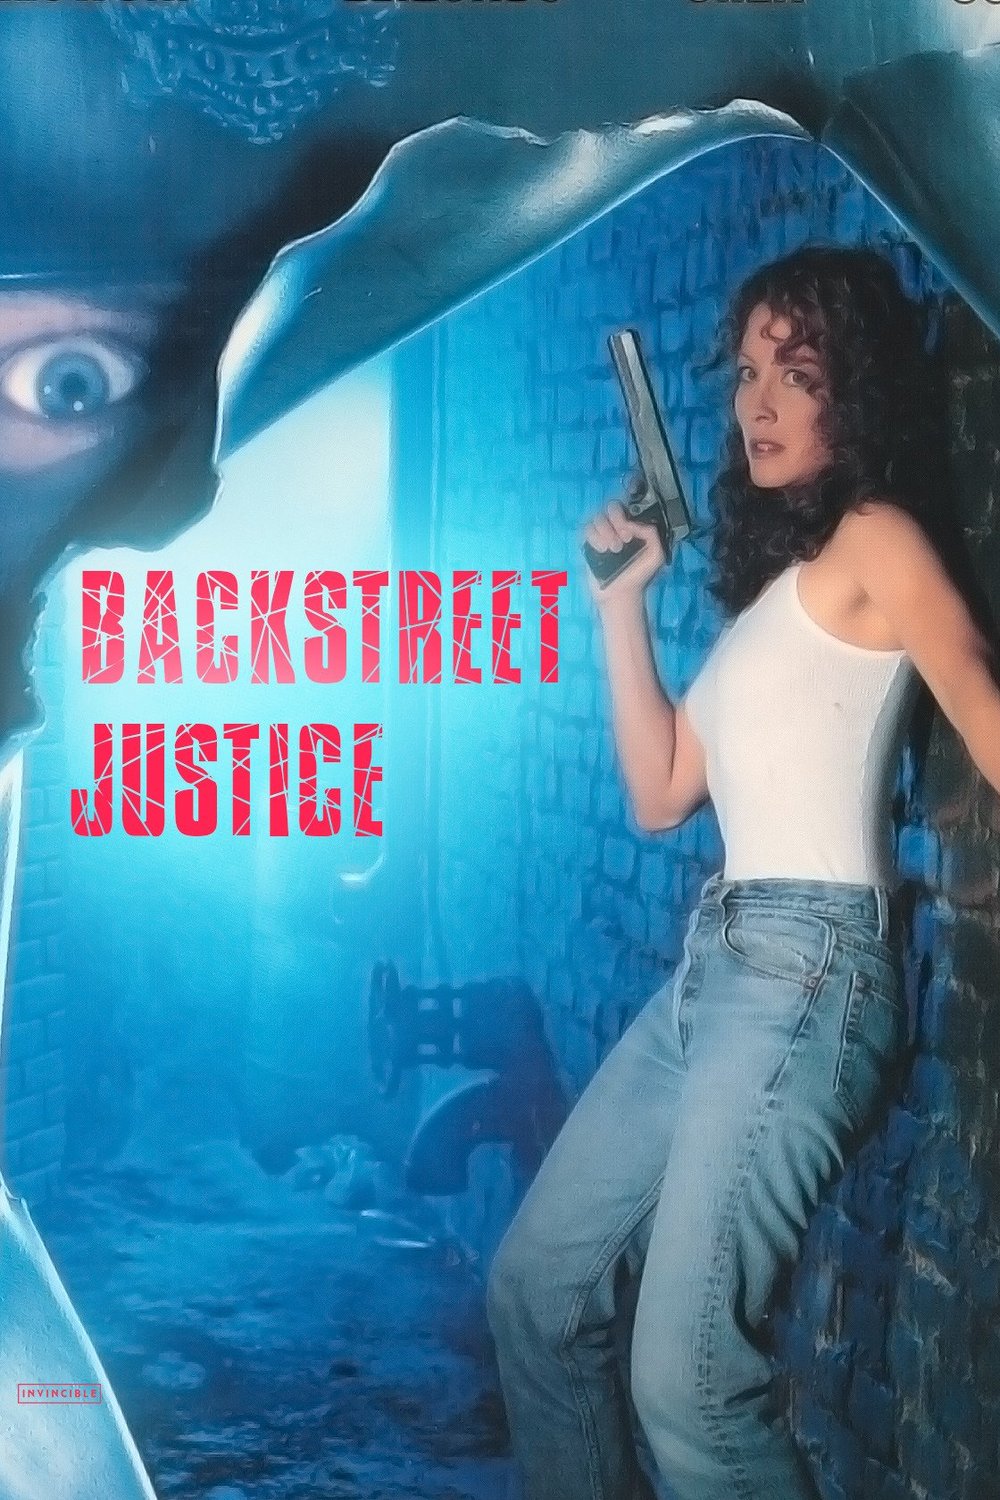 Poster of the movie Backstreet Justice